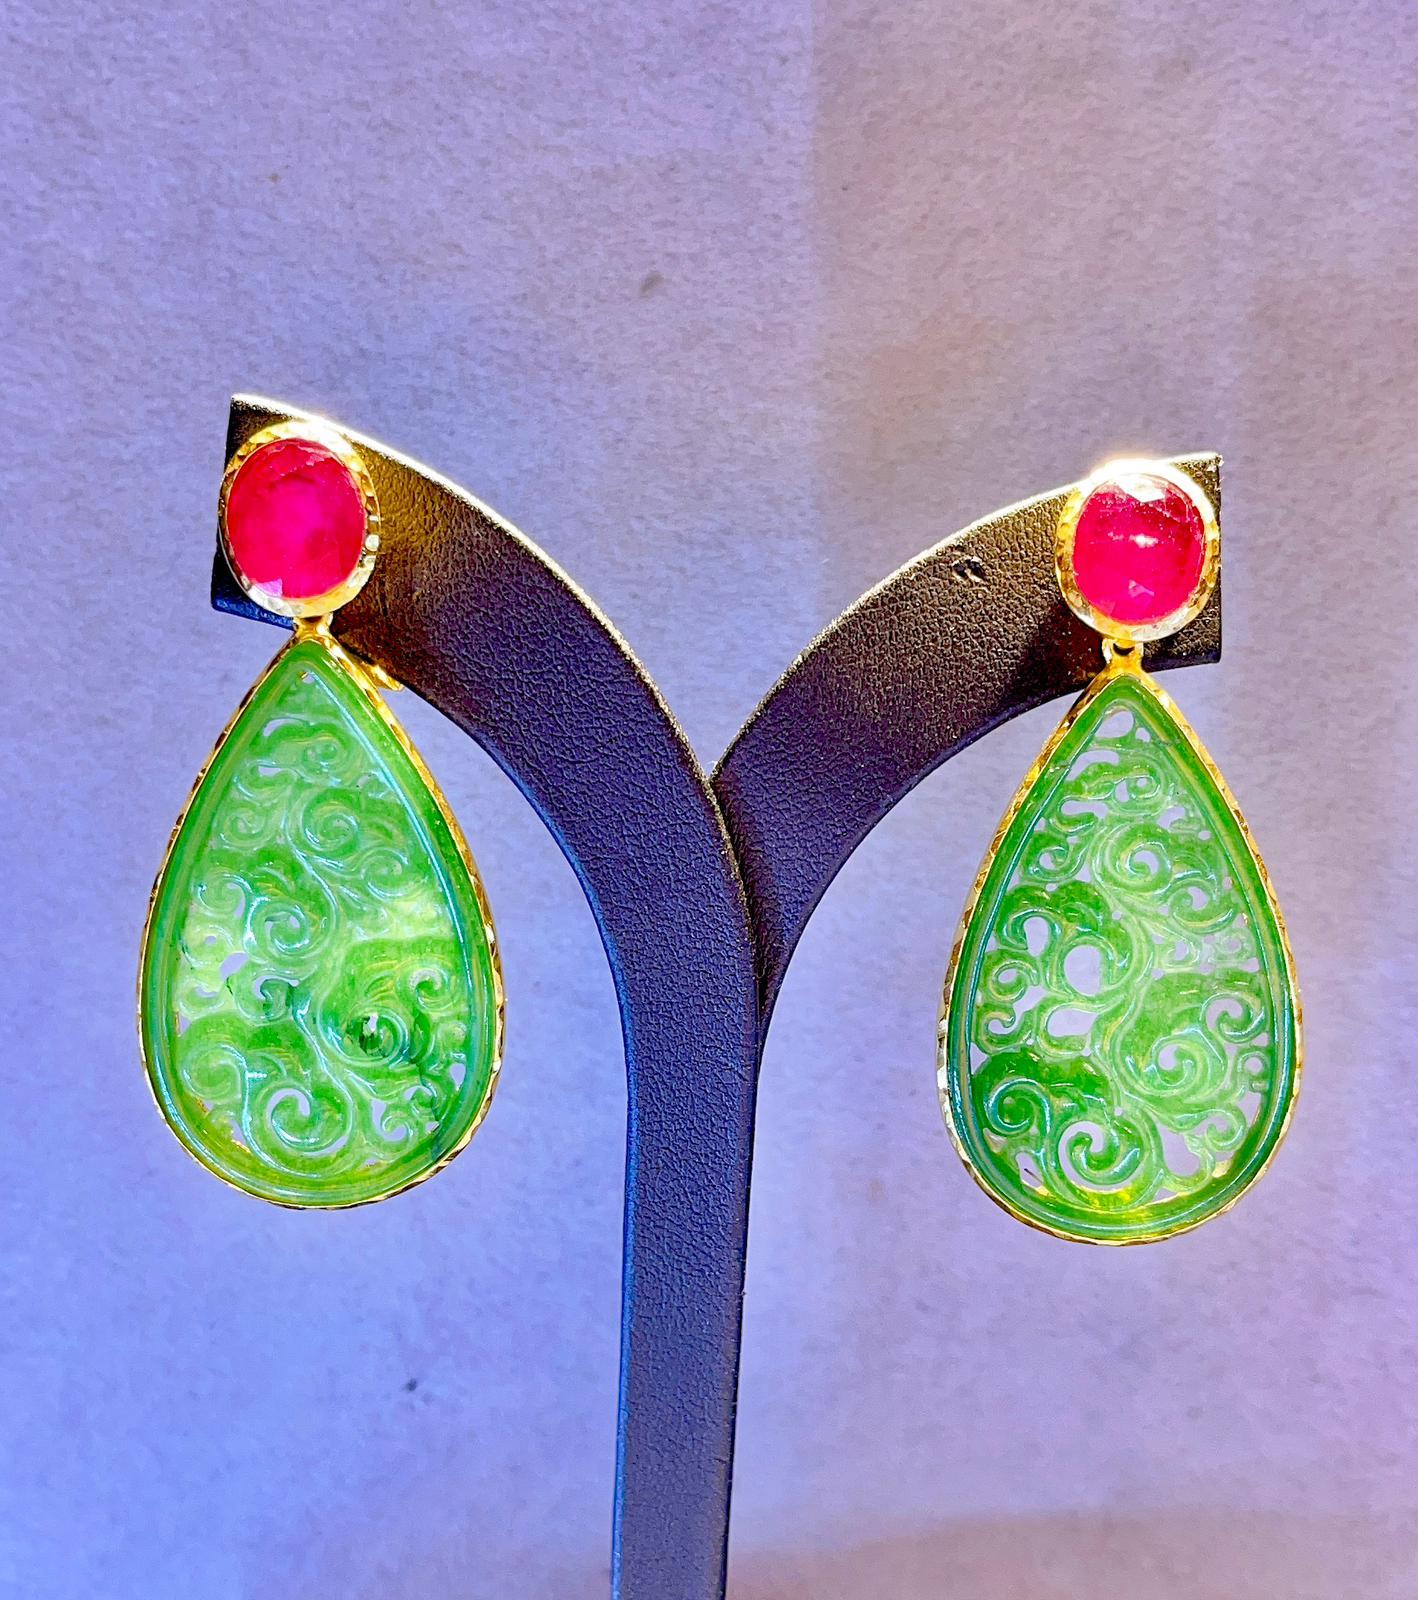 Beautiful Green Jade, Blue Sapphire & Red Ruby Earrings
Multi Natural Gem Earrings 
Set in 22K Gold and Silver 
Natural Ruby, Colors - Red, Pink, 7 Carats 
Ethiopian White Opal and Australian Blue Opal, 7 Carats 
This earrings are the perfect cross